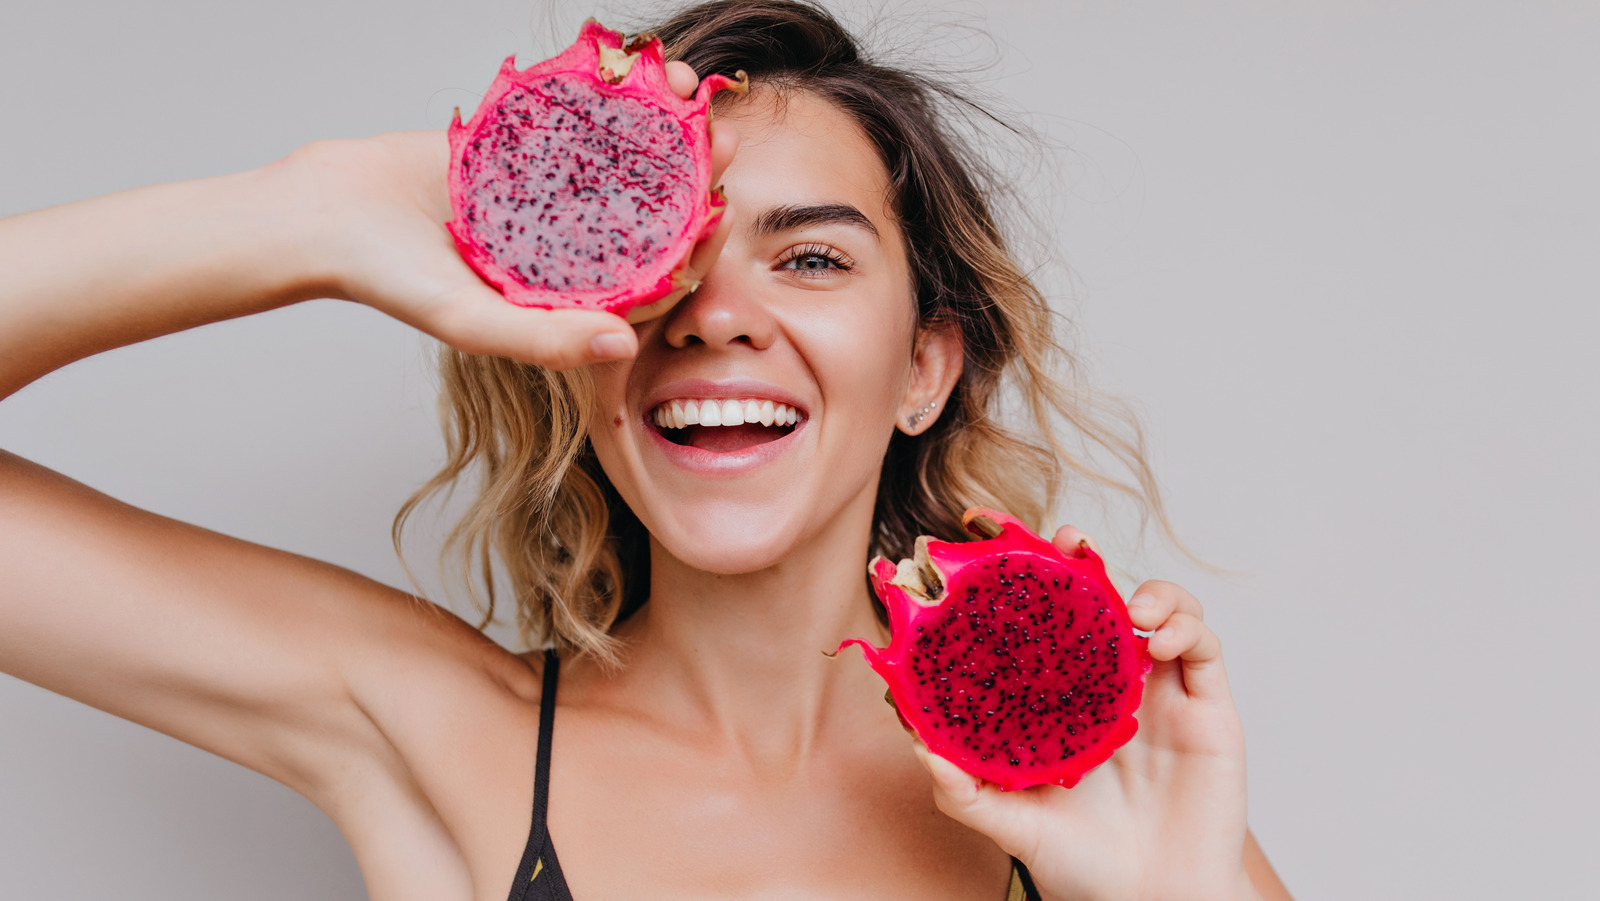 Red Dragon Fruit Versus White Dragon Fruit: What's The Difference? - Health Digest